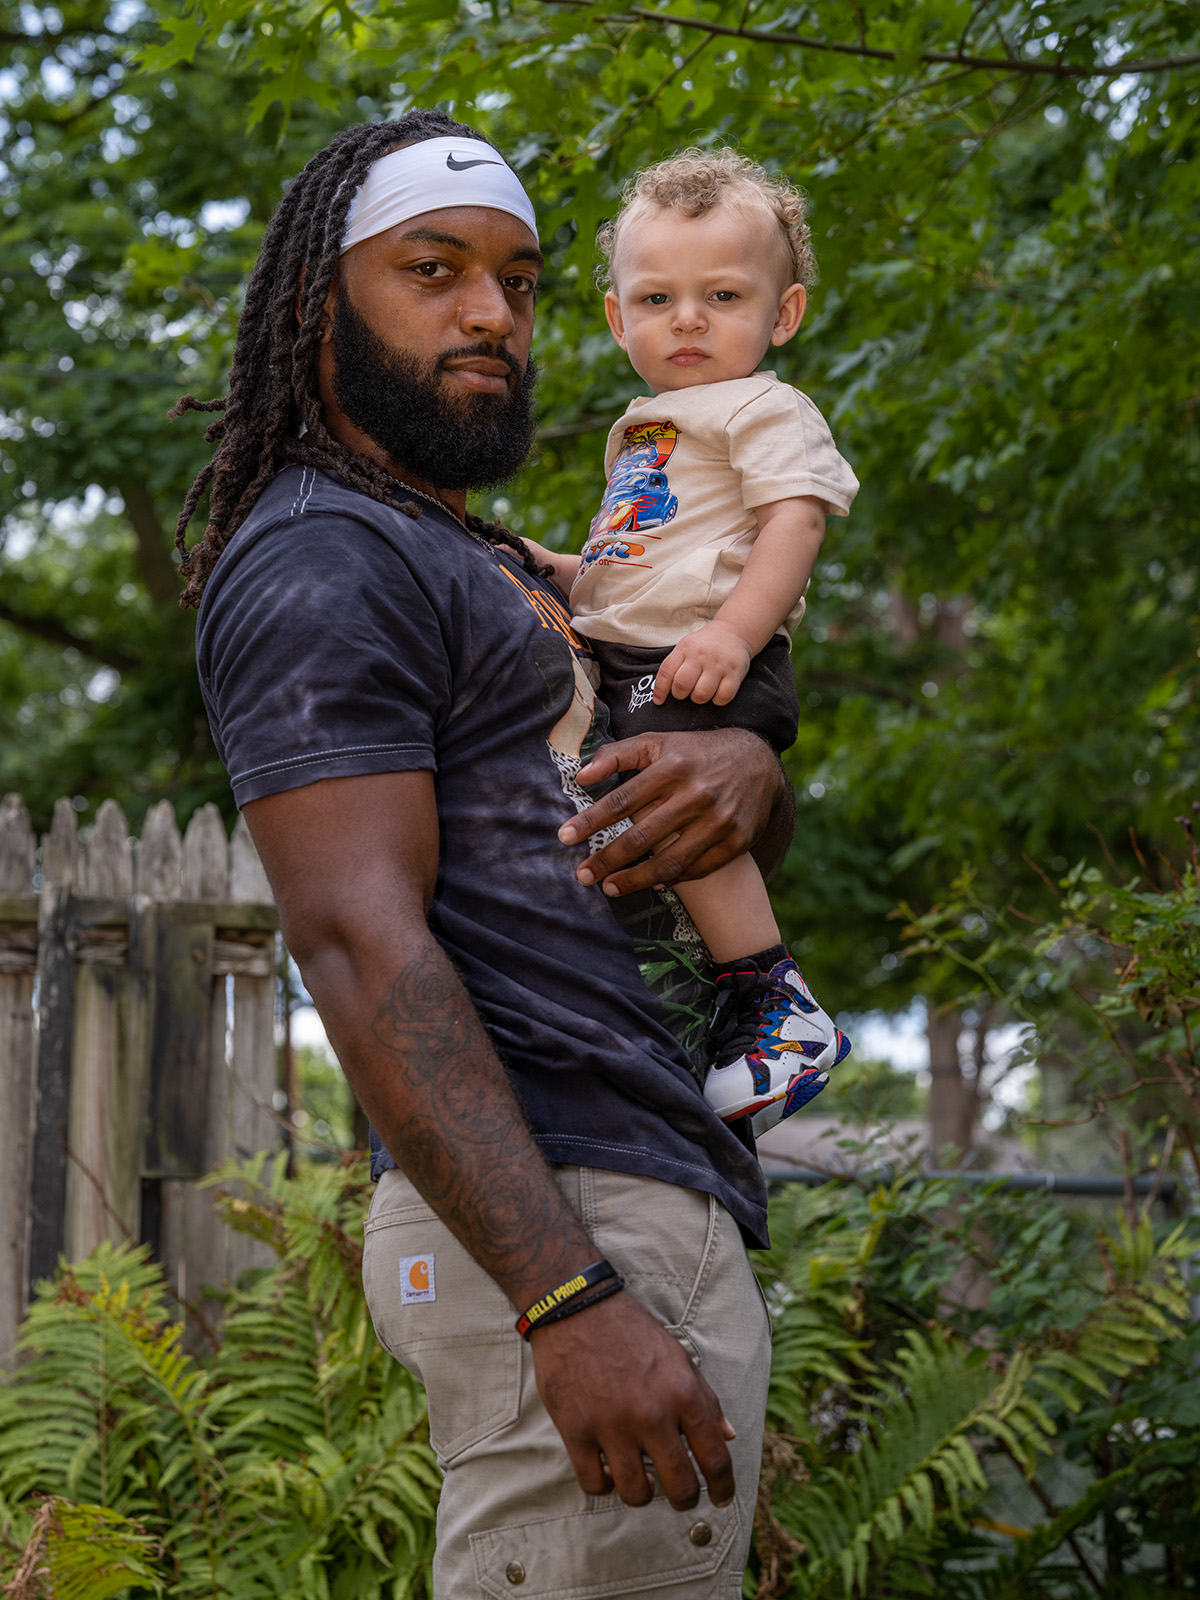 A Black man holds a young child while standing outside